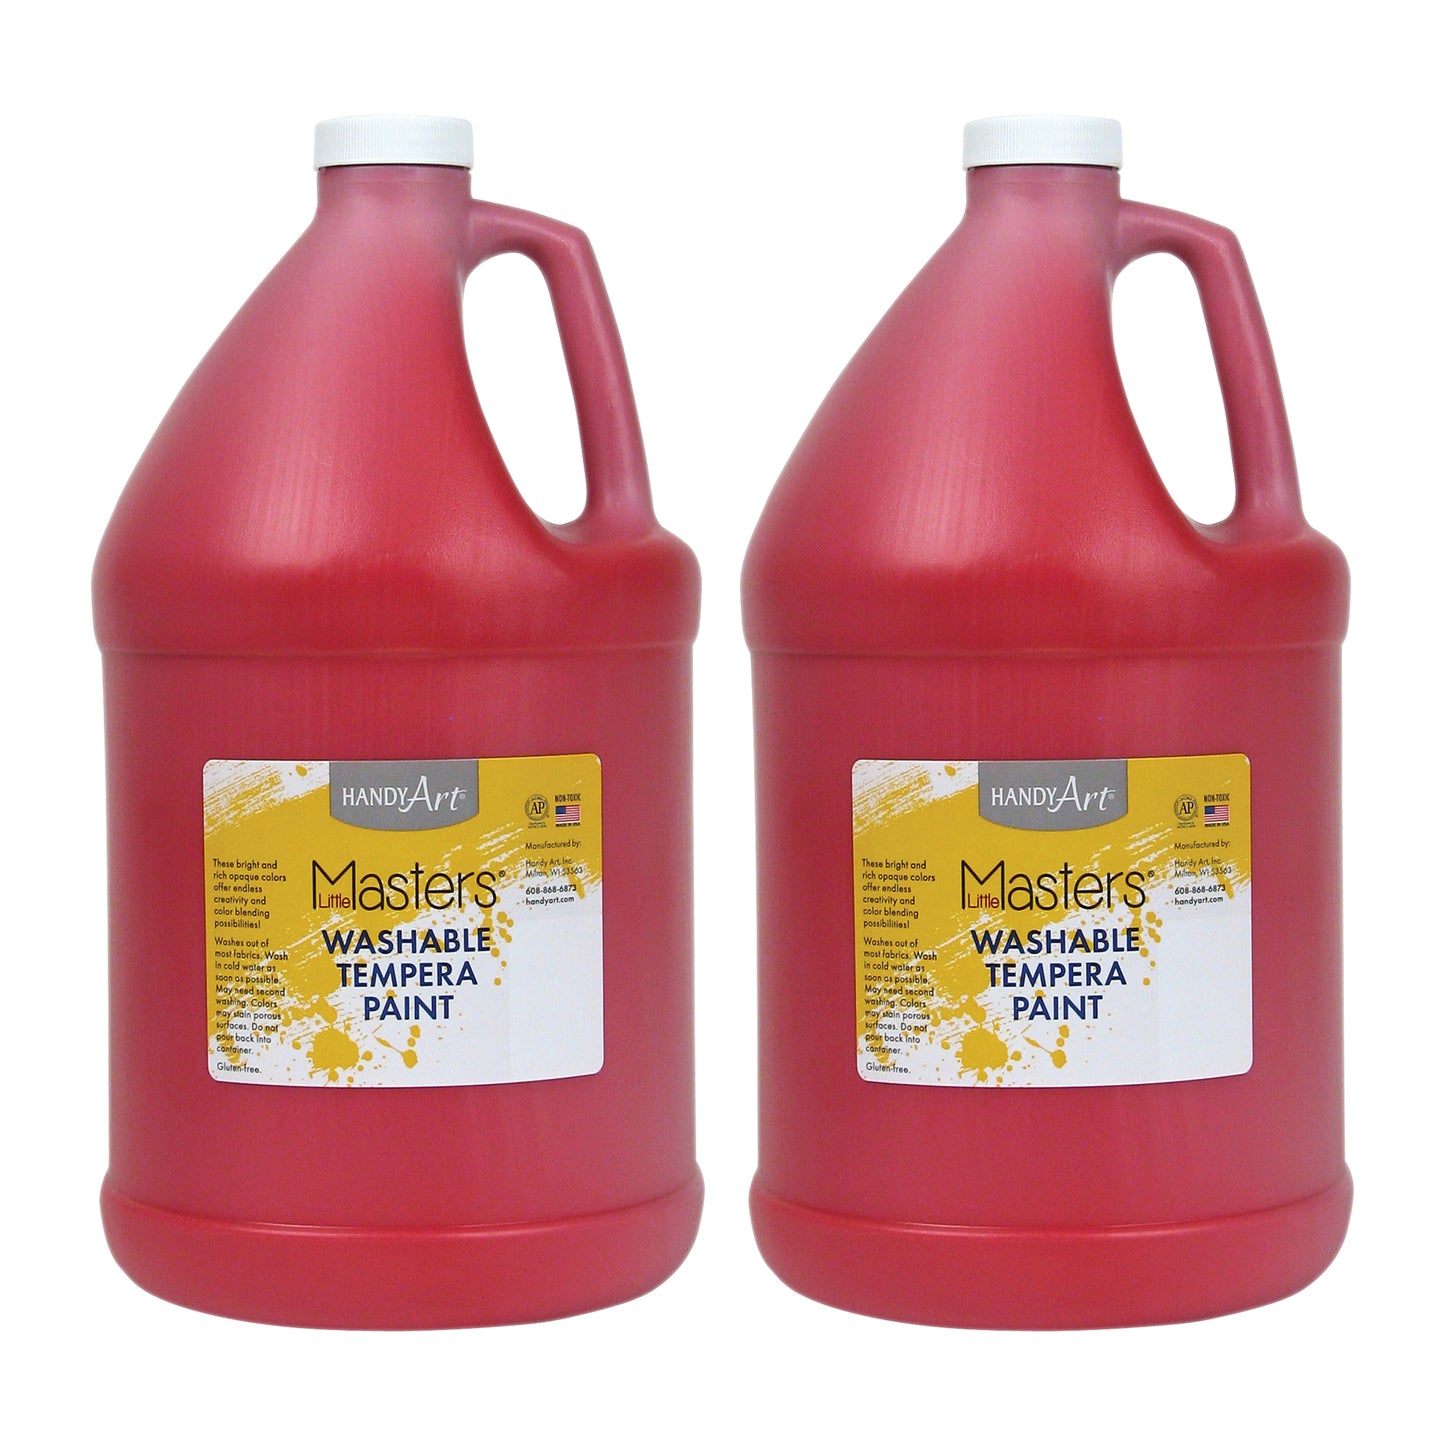 Little Masters® Washable Tempera Paint, Red, Gallon, Pack of 2